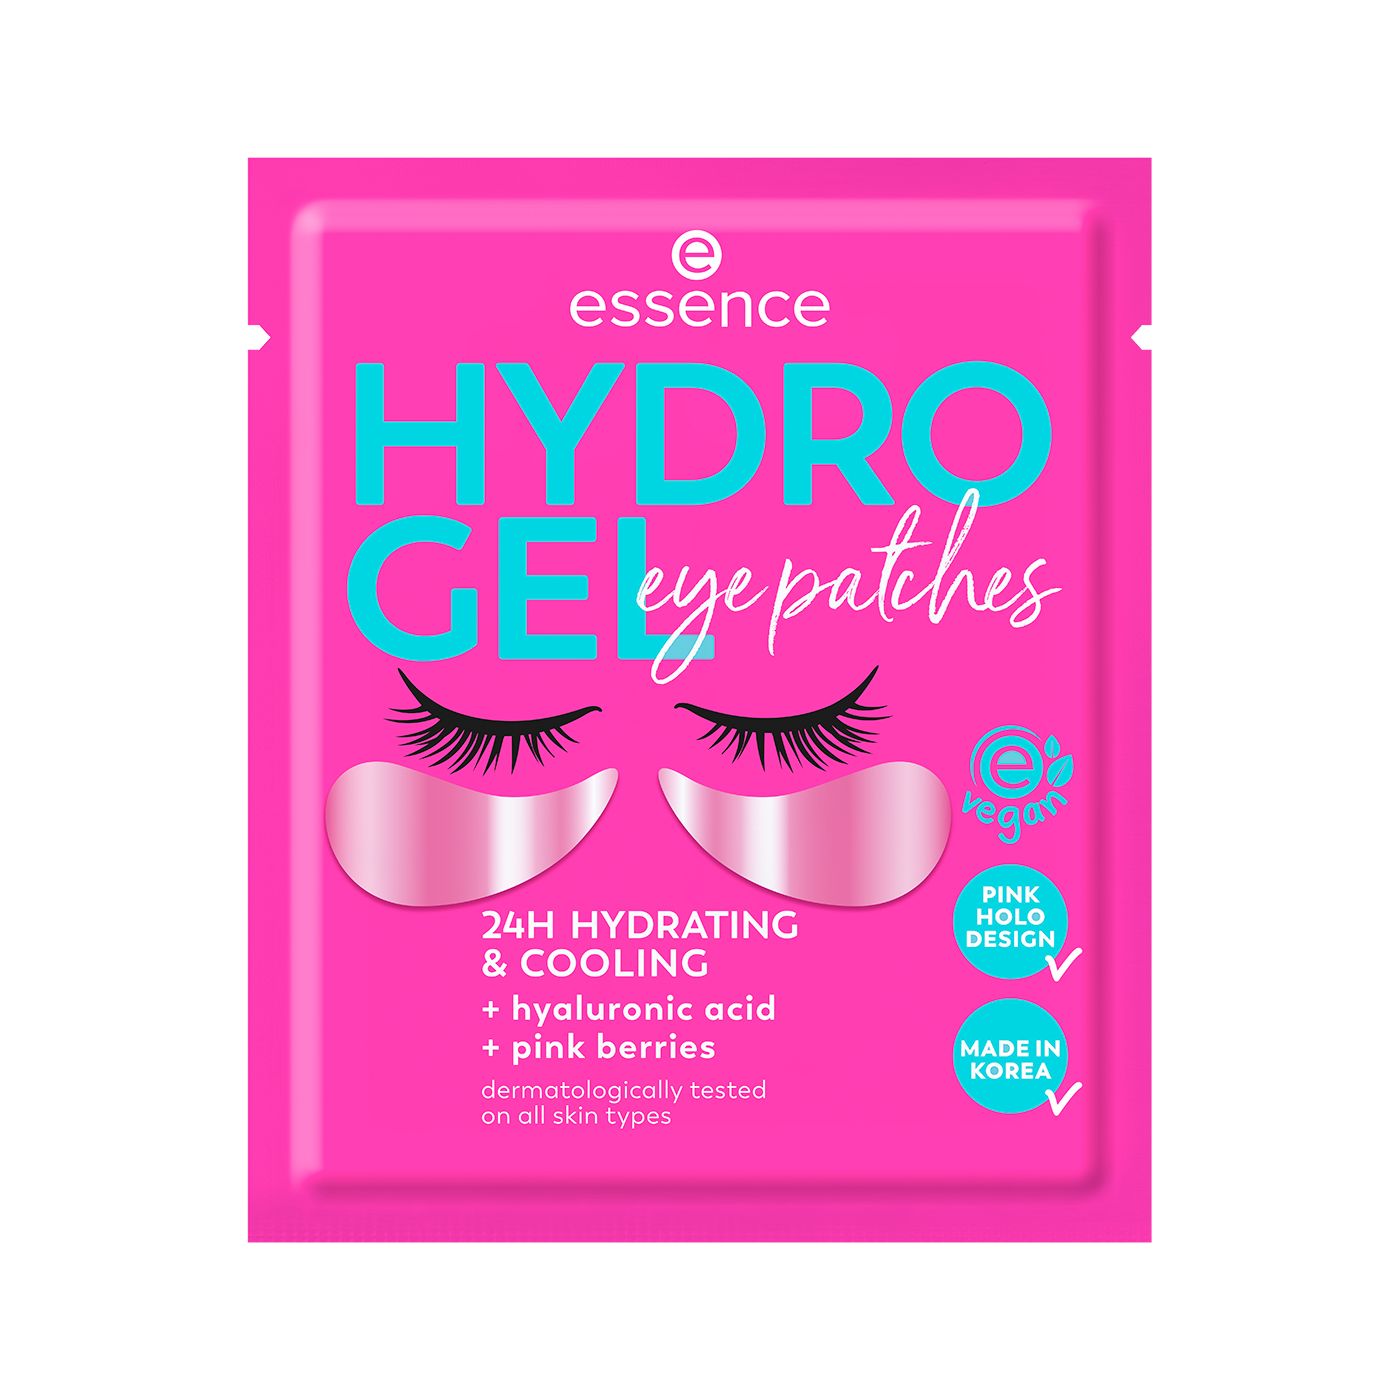 Augen-Patches - Hydro Gel Eye Patches